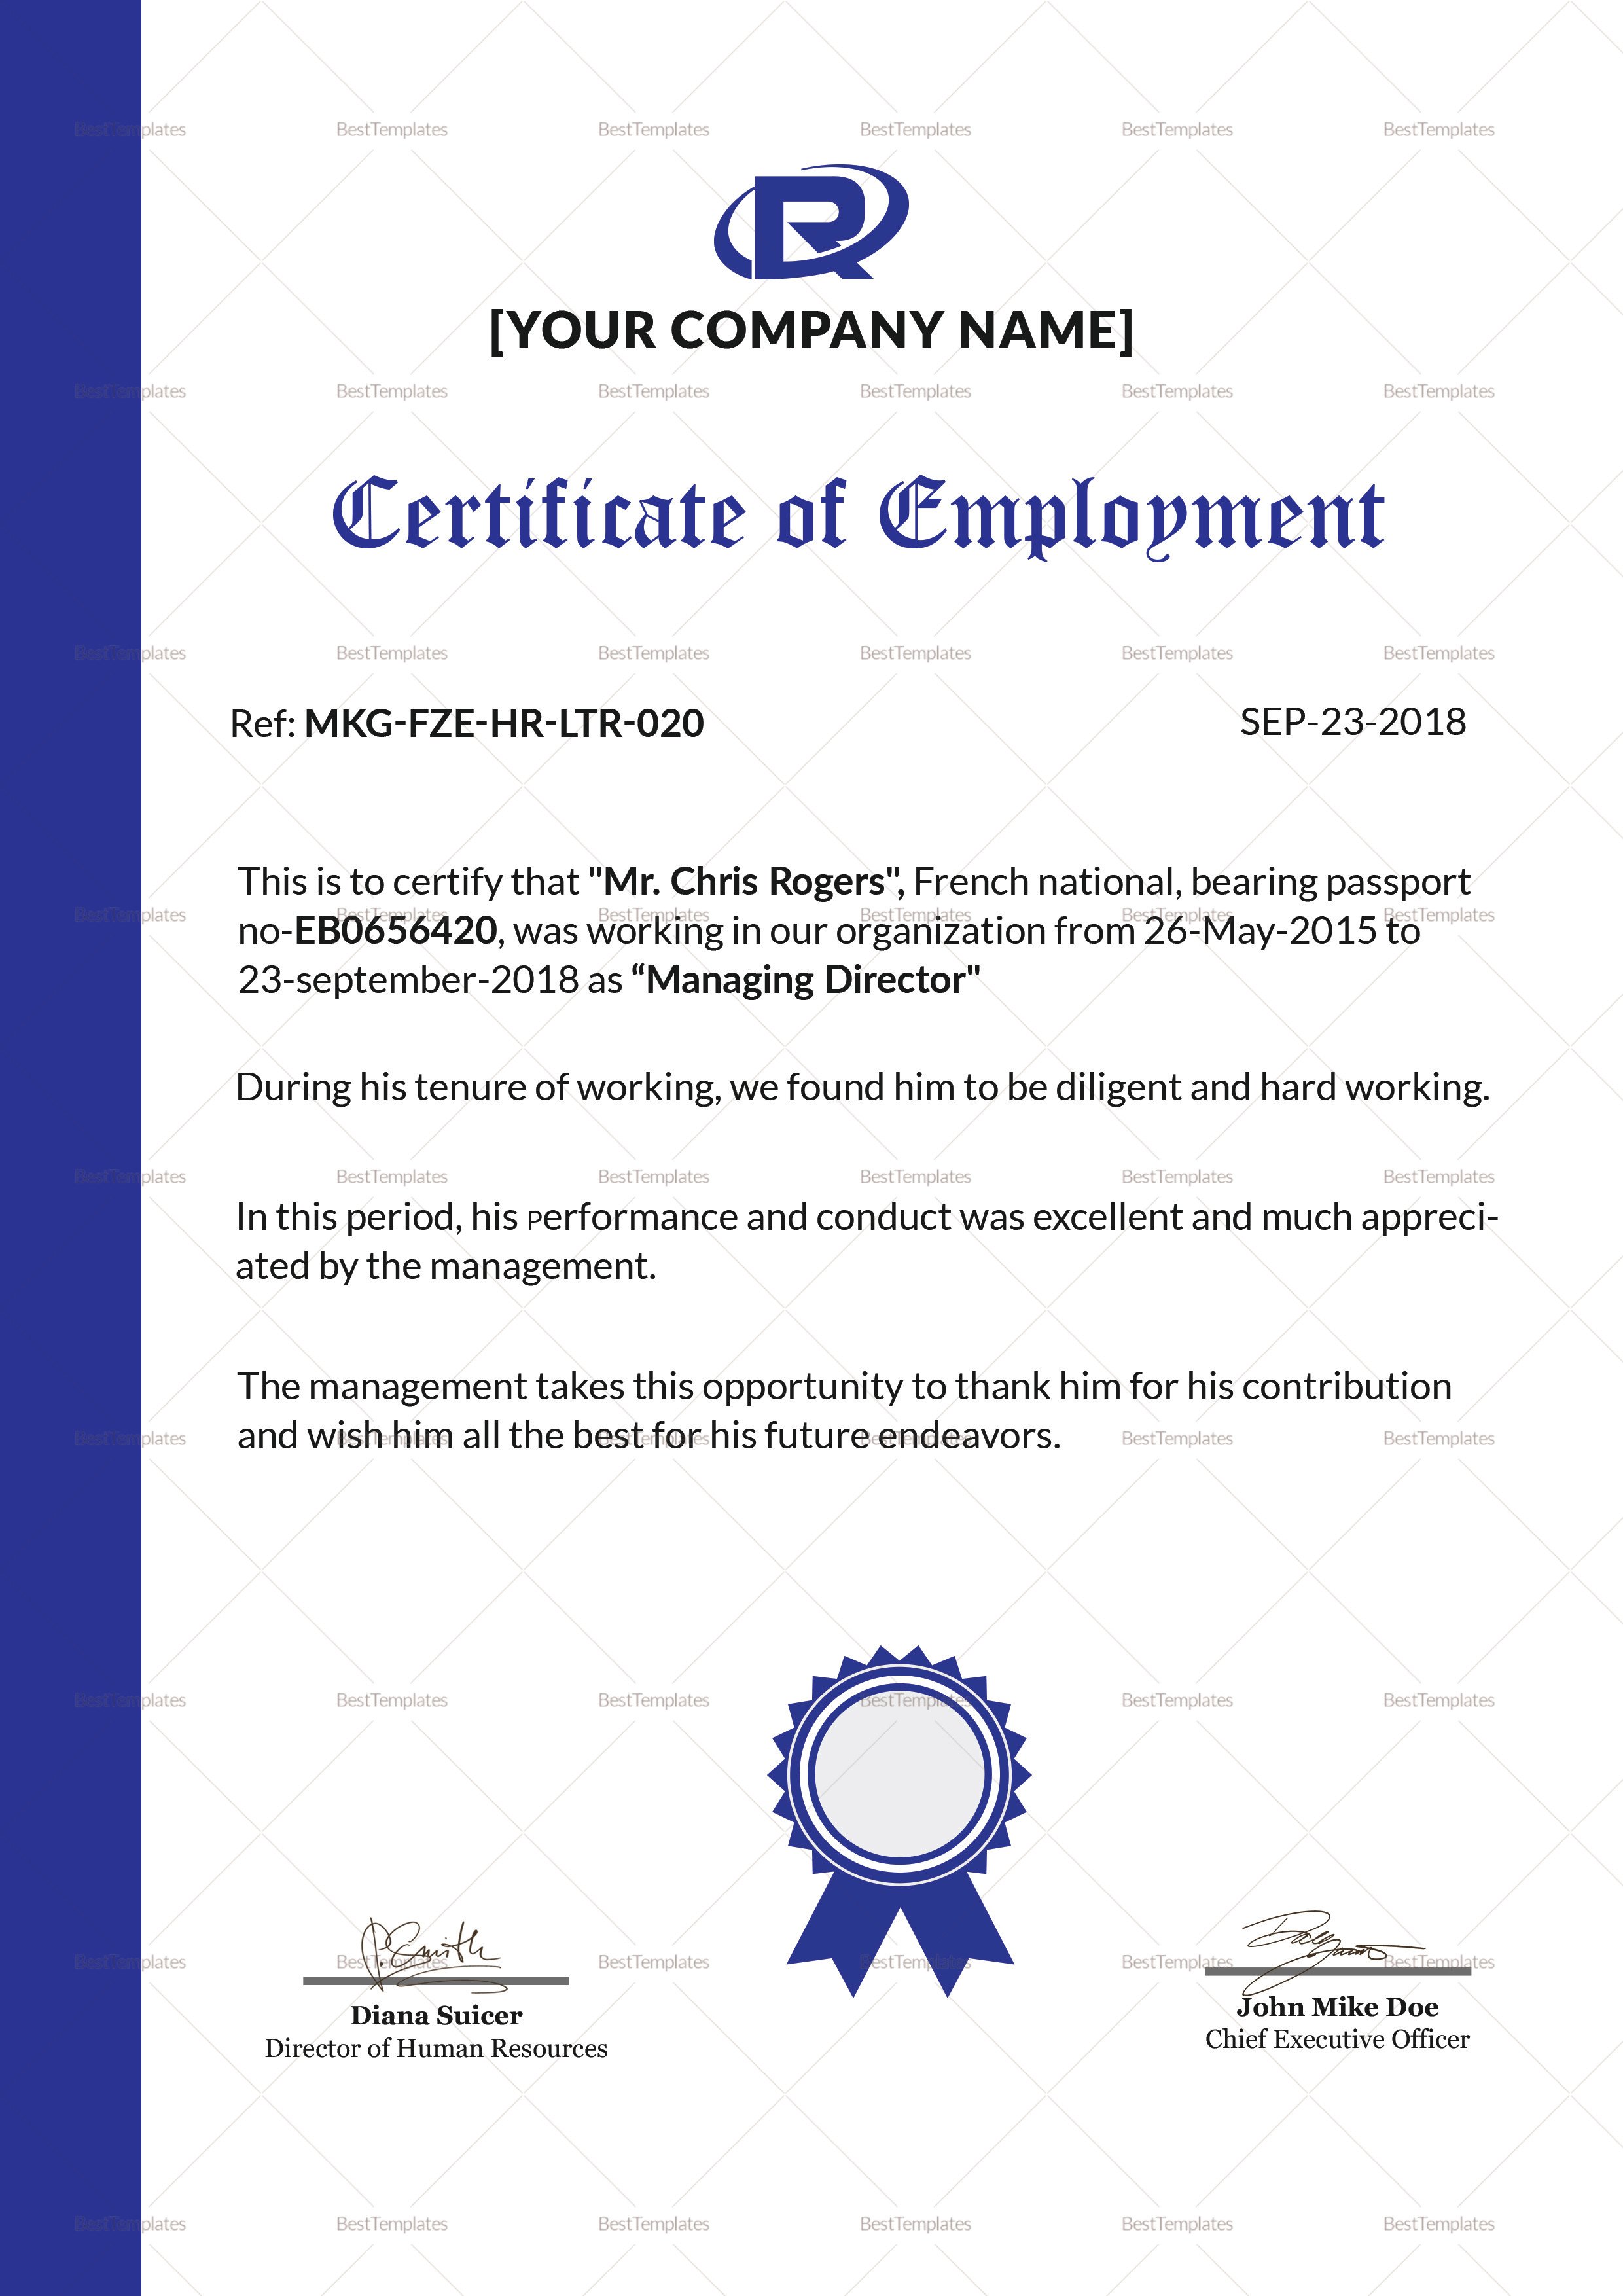 Sample Certificate Of Employment Excellent Employment Certificate Design Template In Psd Word